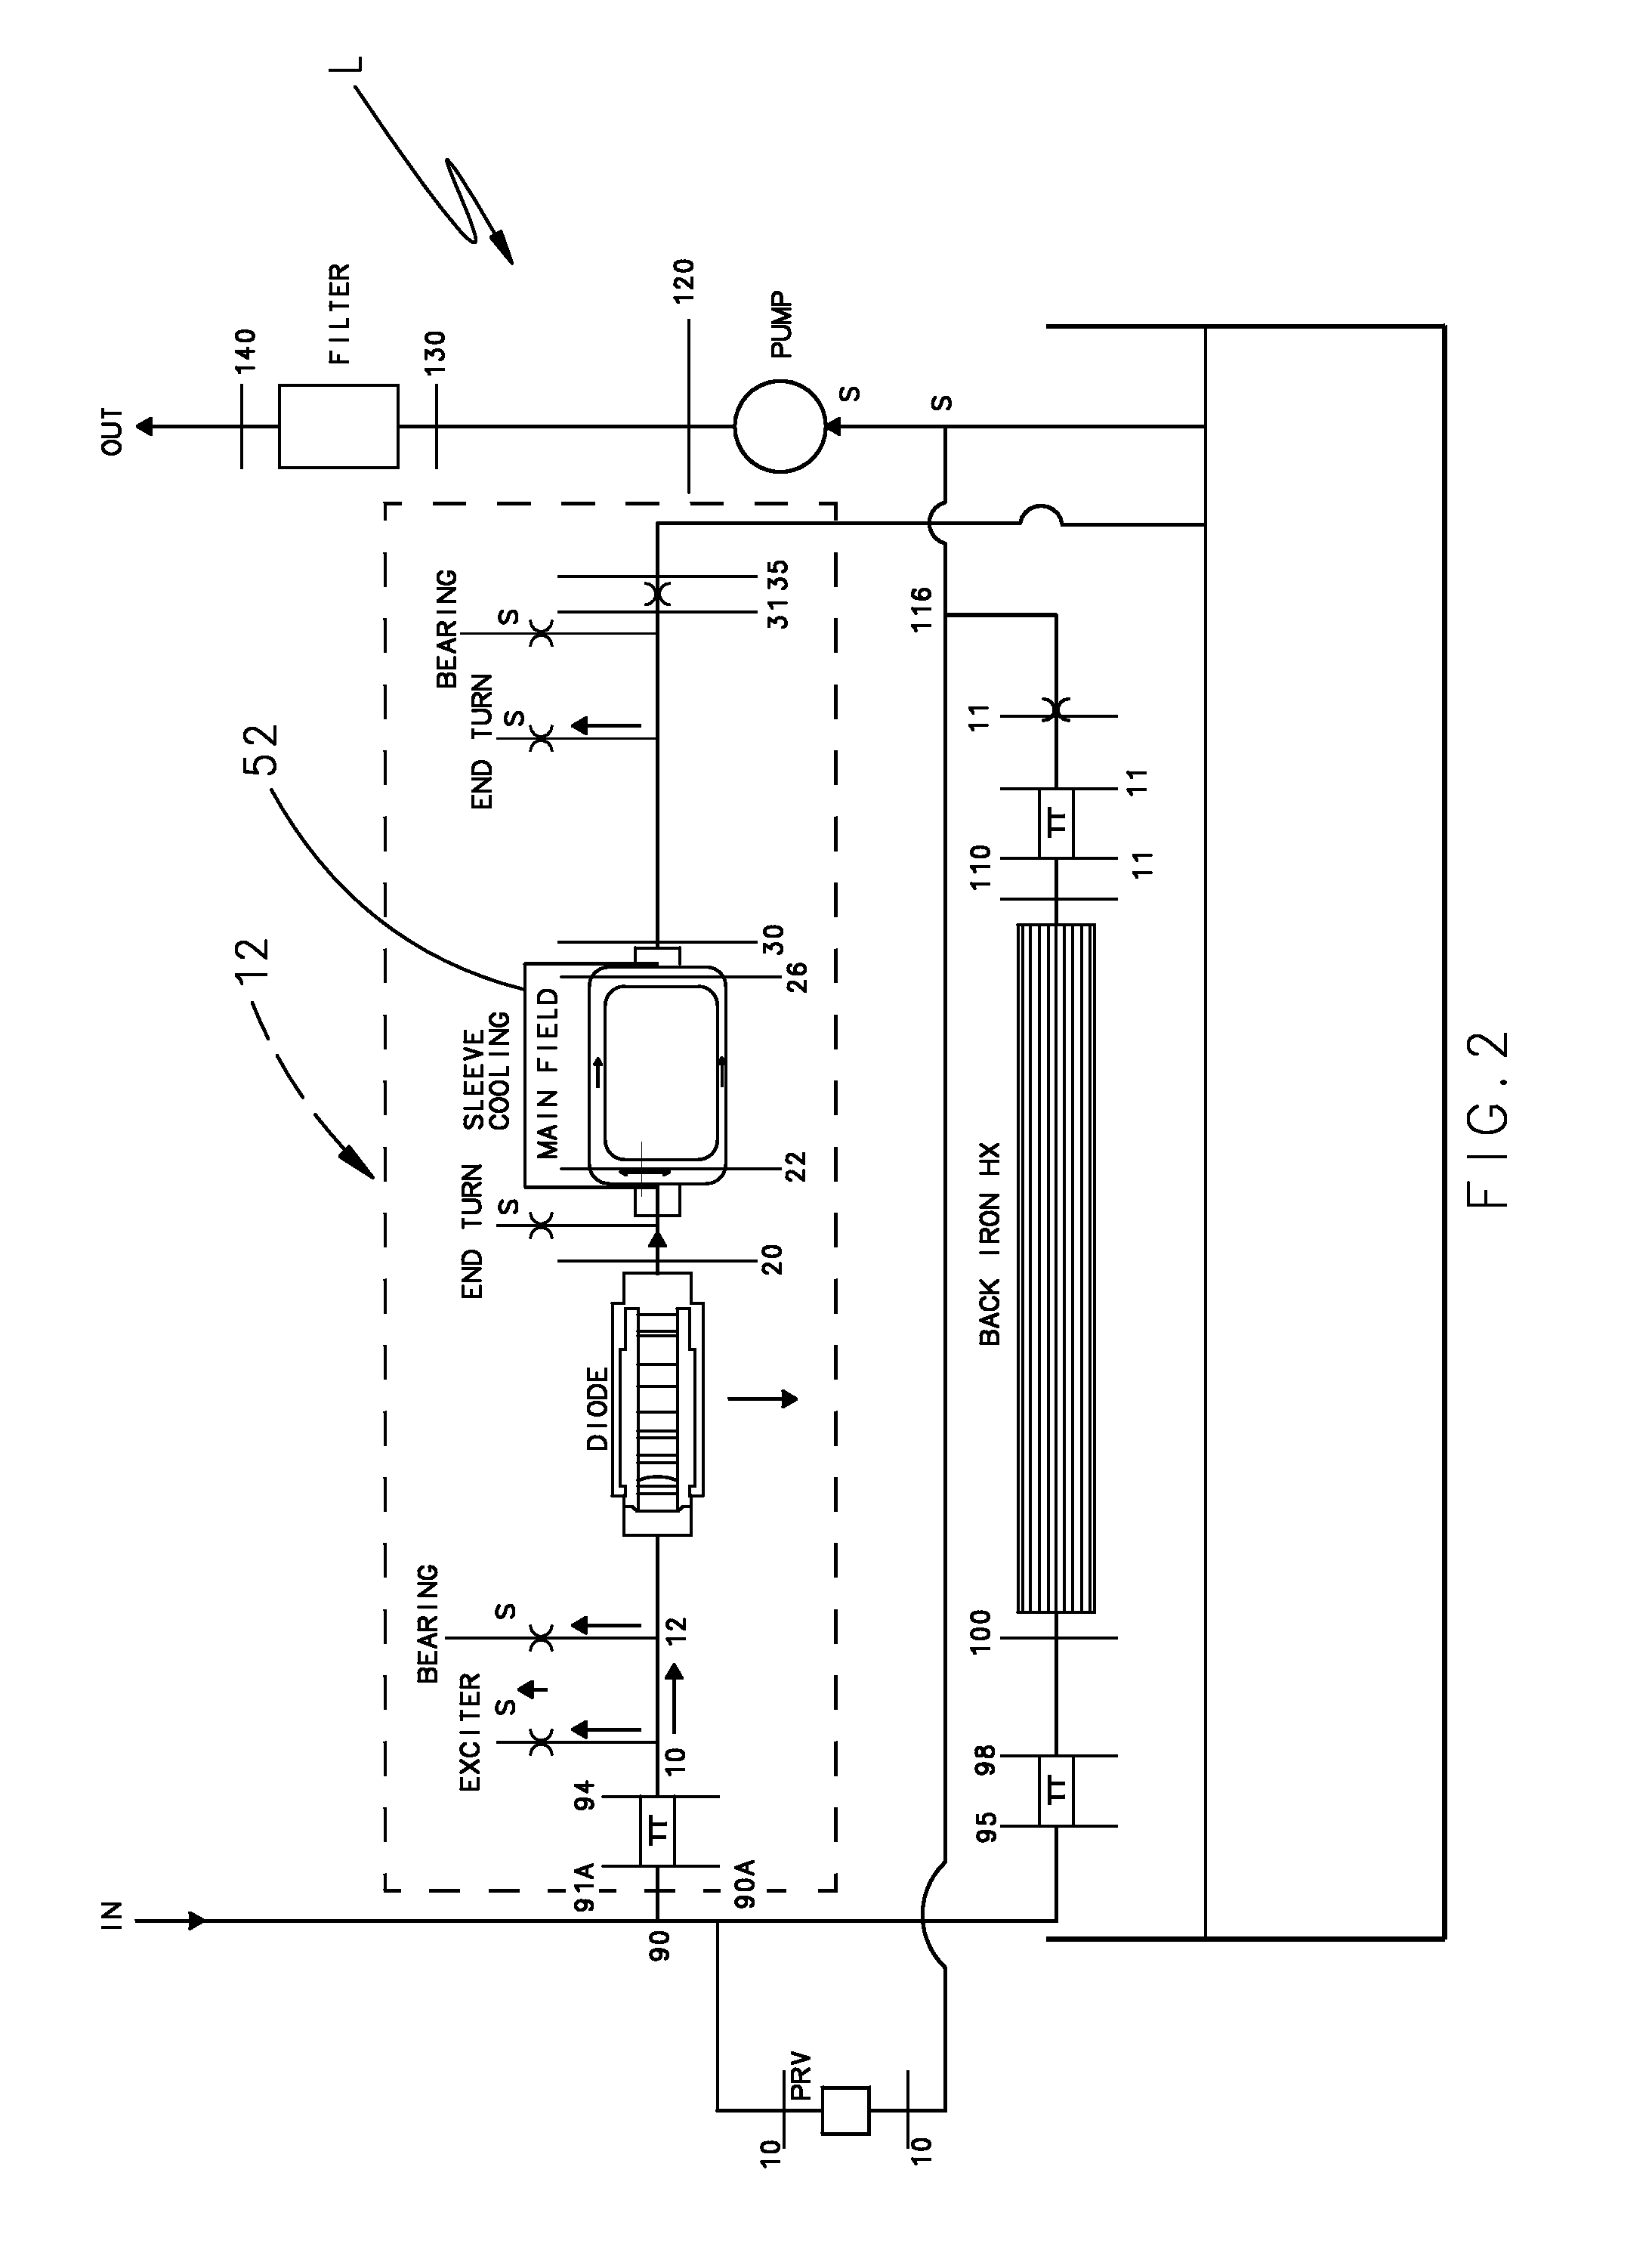 Rotor cooling system for synchronous machines with conductive sleeve